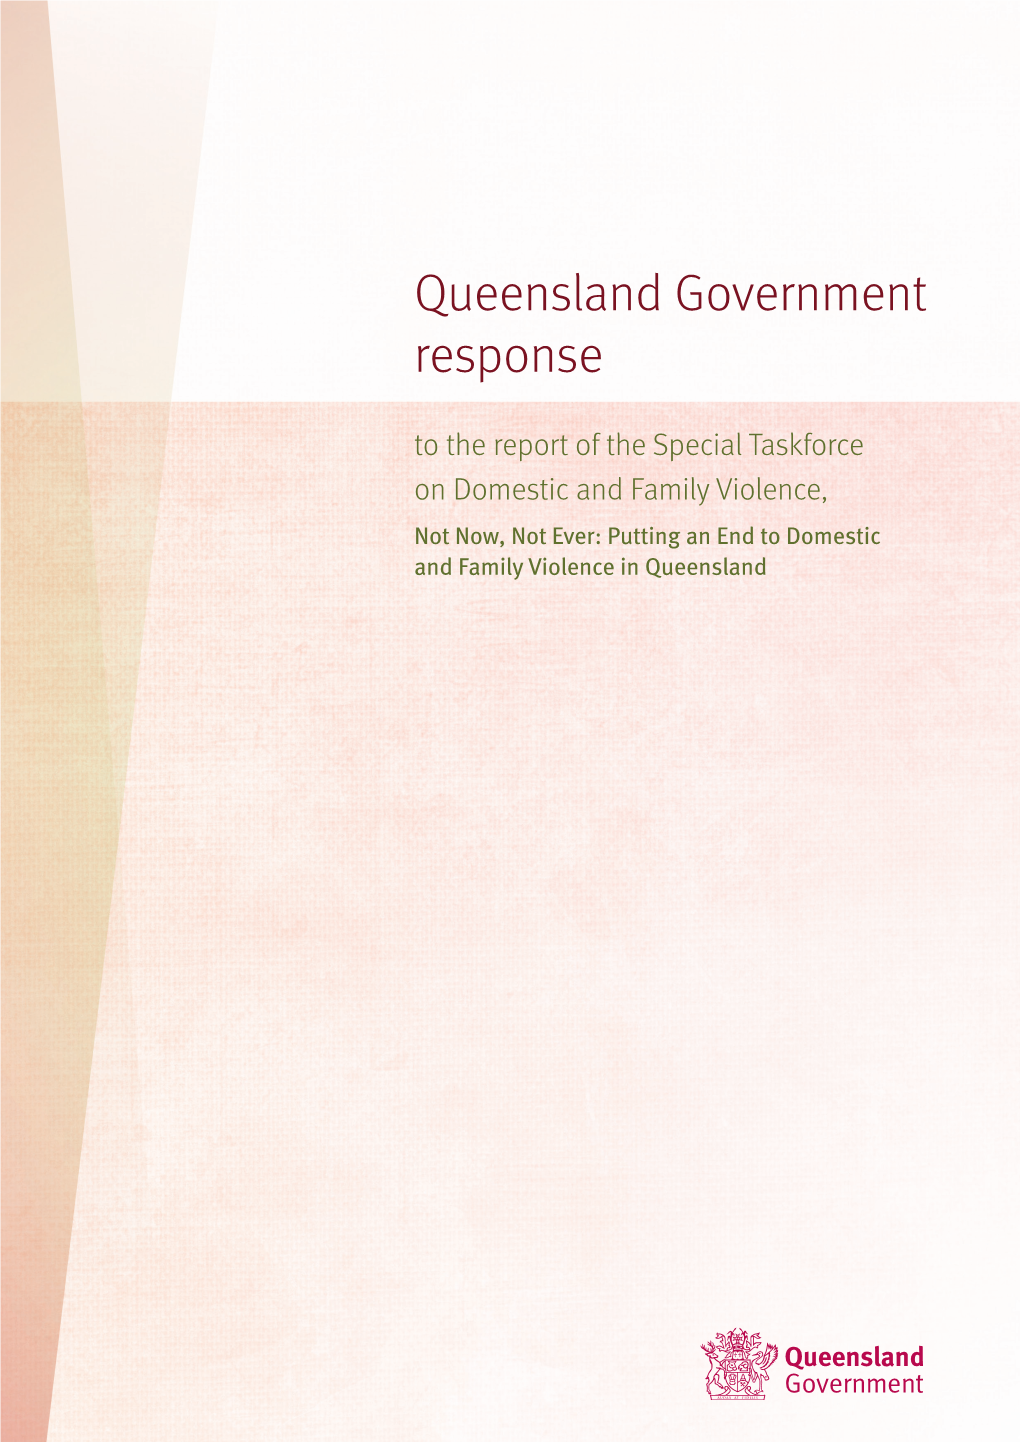 Government Response to the Report of the Special Taskforce on Domestic